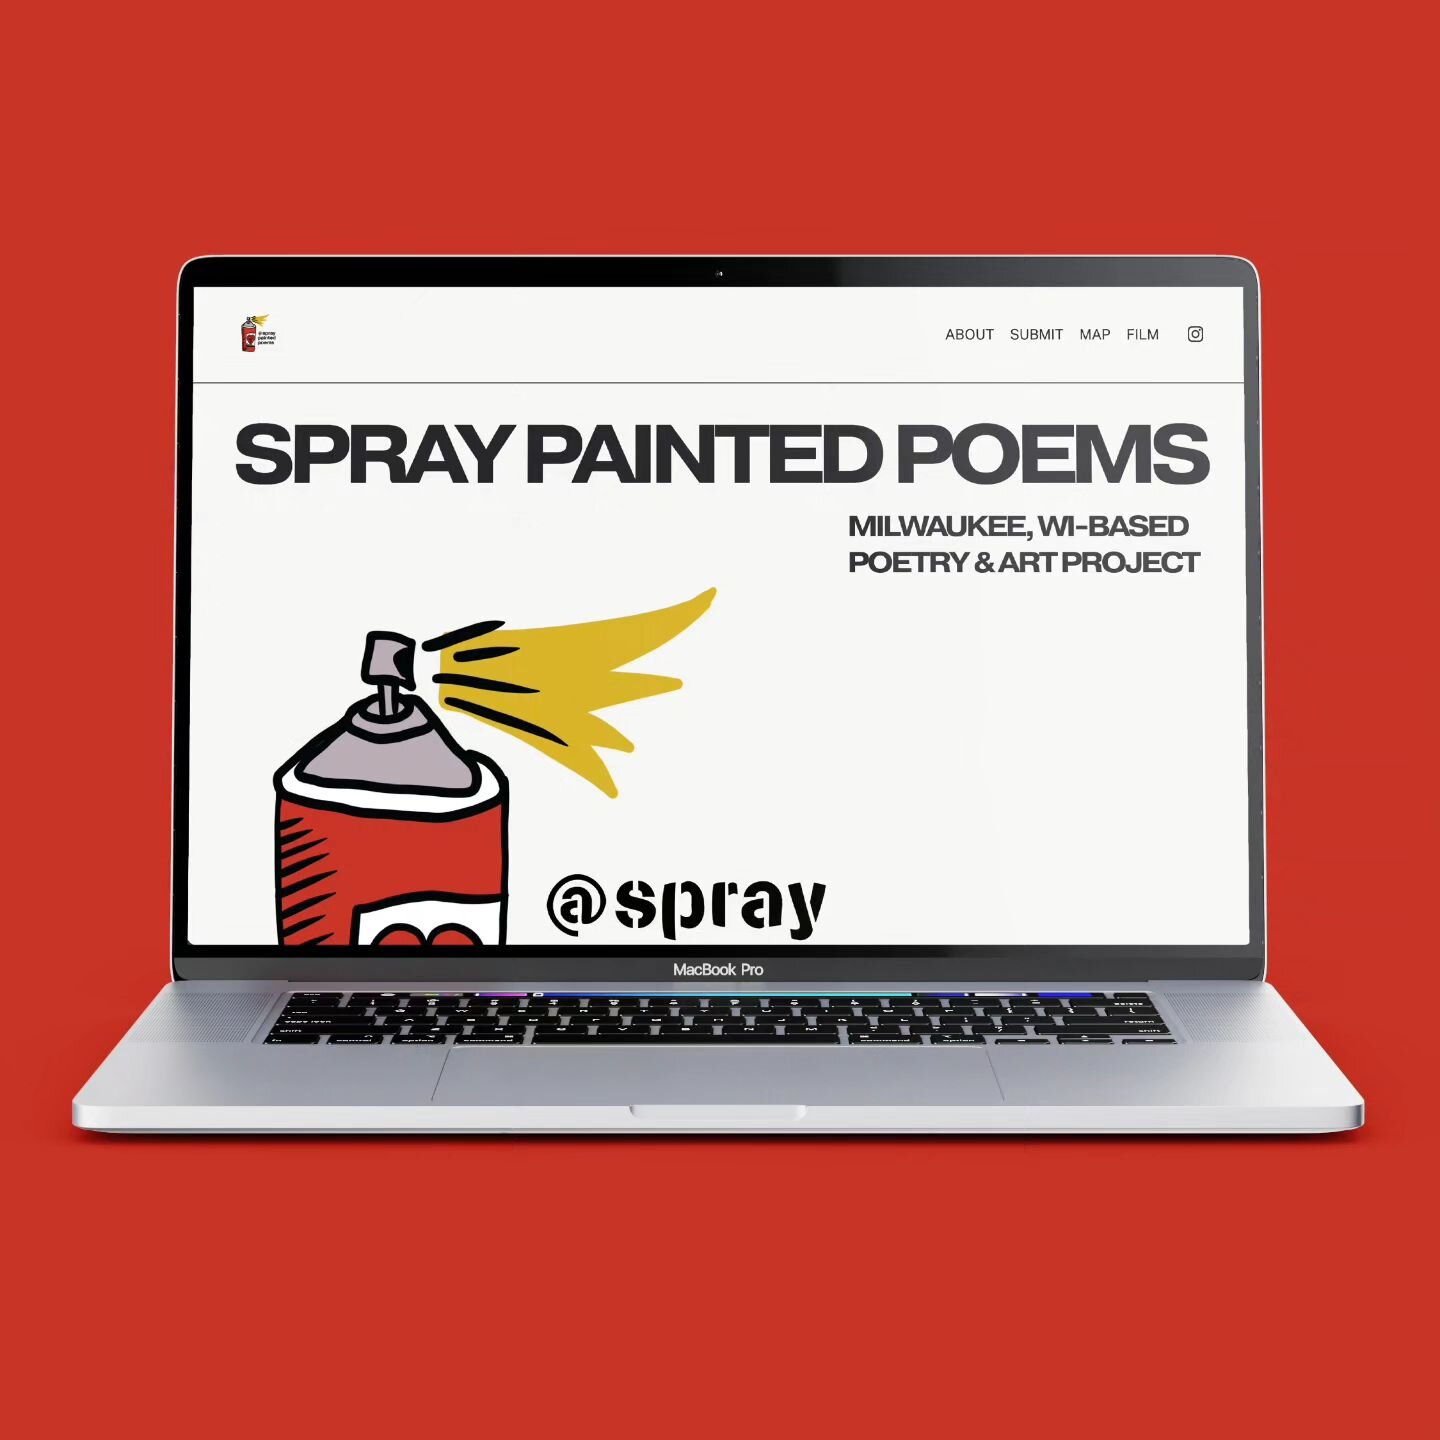 New website has launched - link in bio so you better check it out! 

✨️ learn more about the project
✍️ submit your poems and lyrics to be spray painted 
🗺 check out the proposed business locations for sidewalk spray painting this May
🎬 learn more 